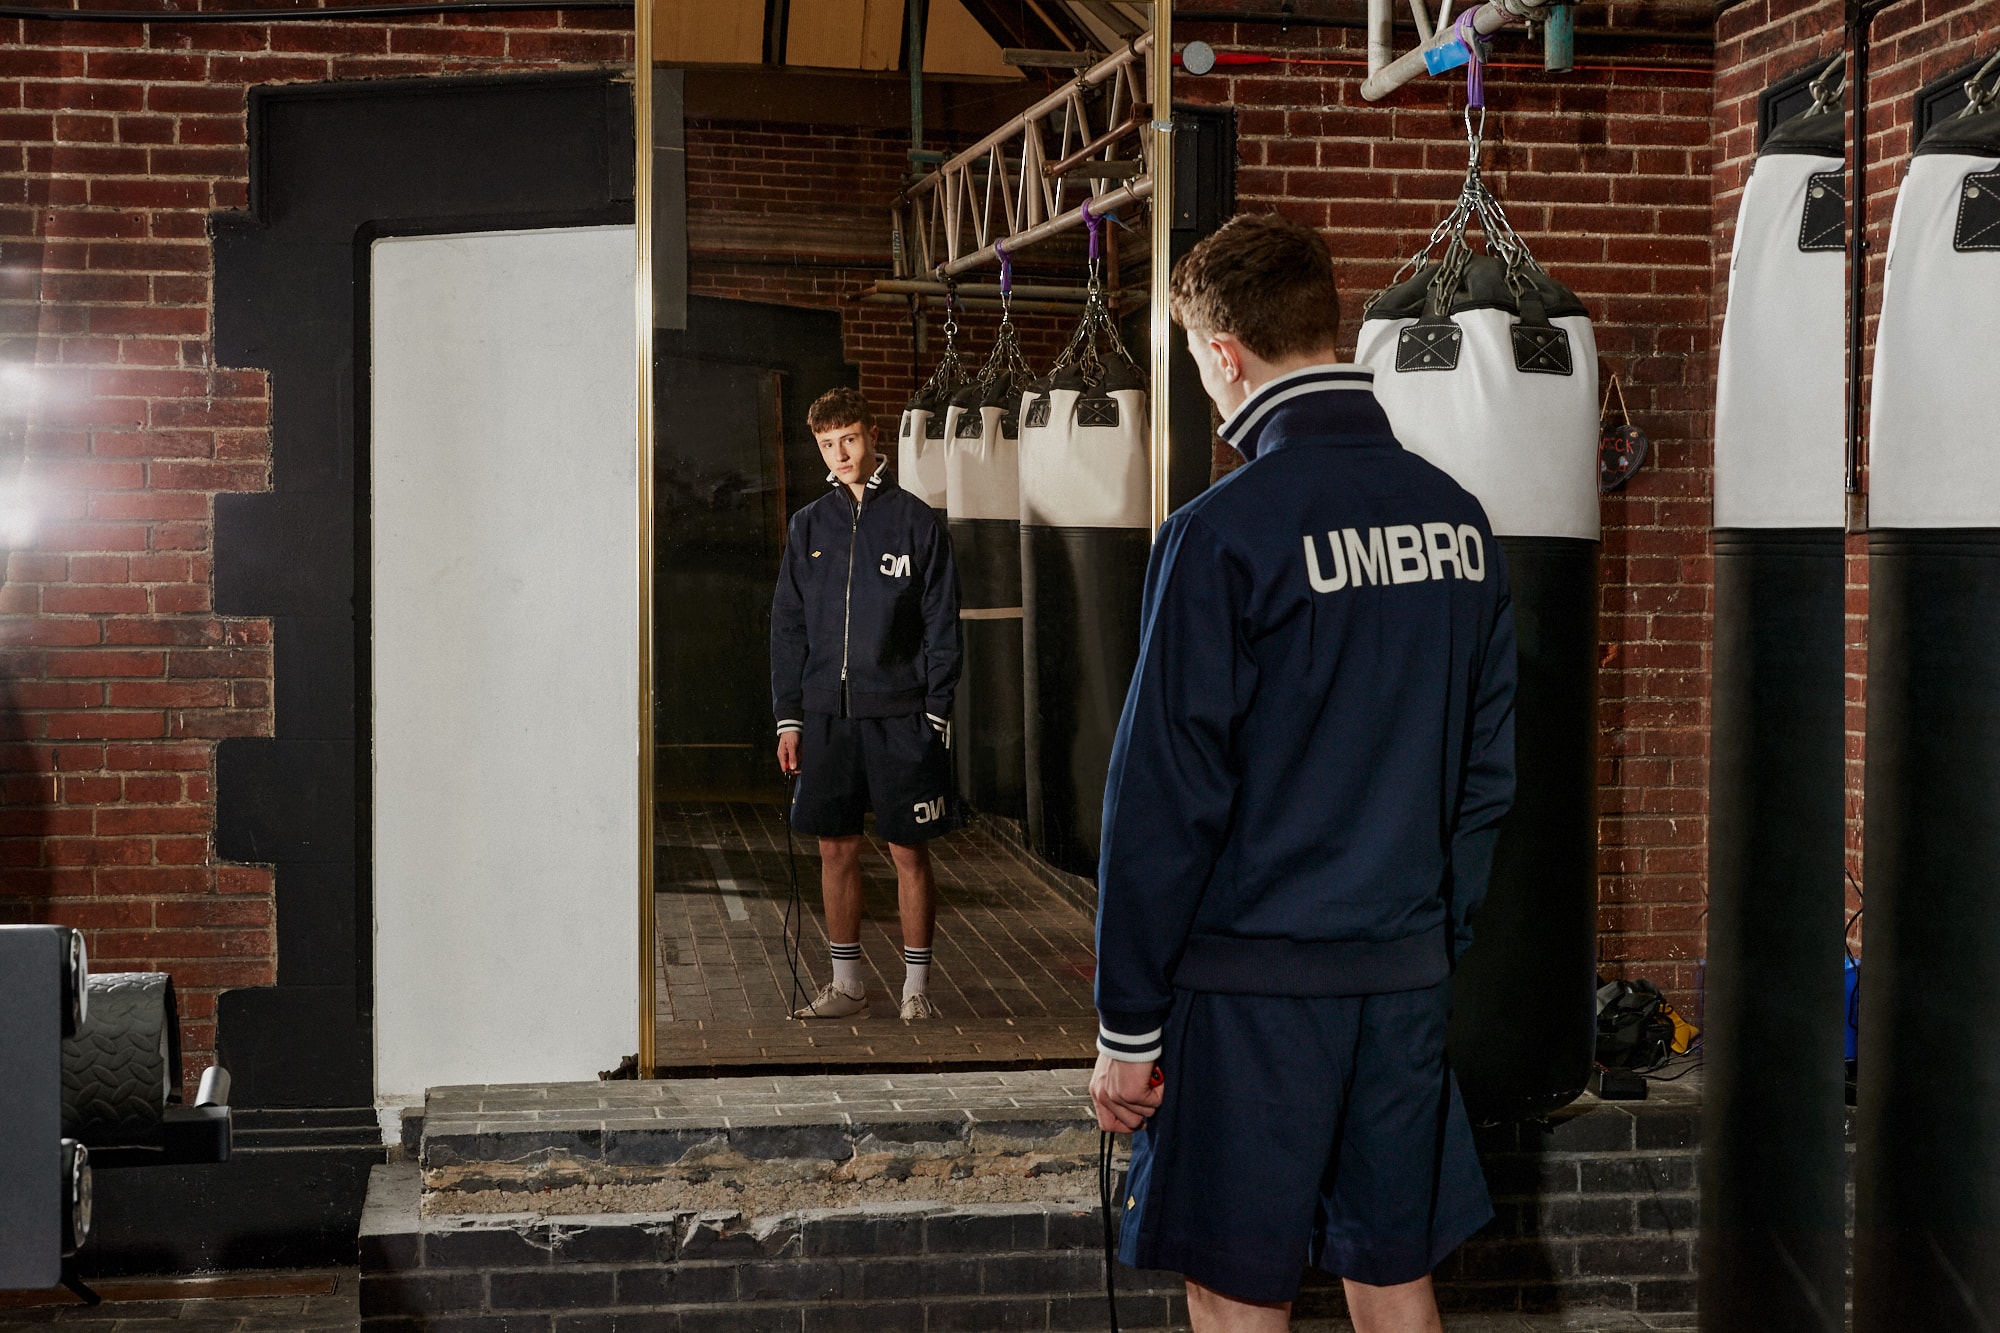 Umbro Nigel Cabourn army gym design training gear military UMBRO british track suits drill top shorts pants release info date